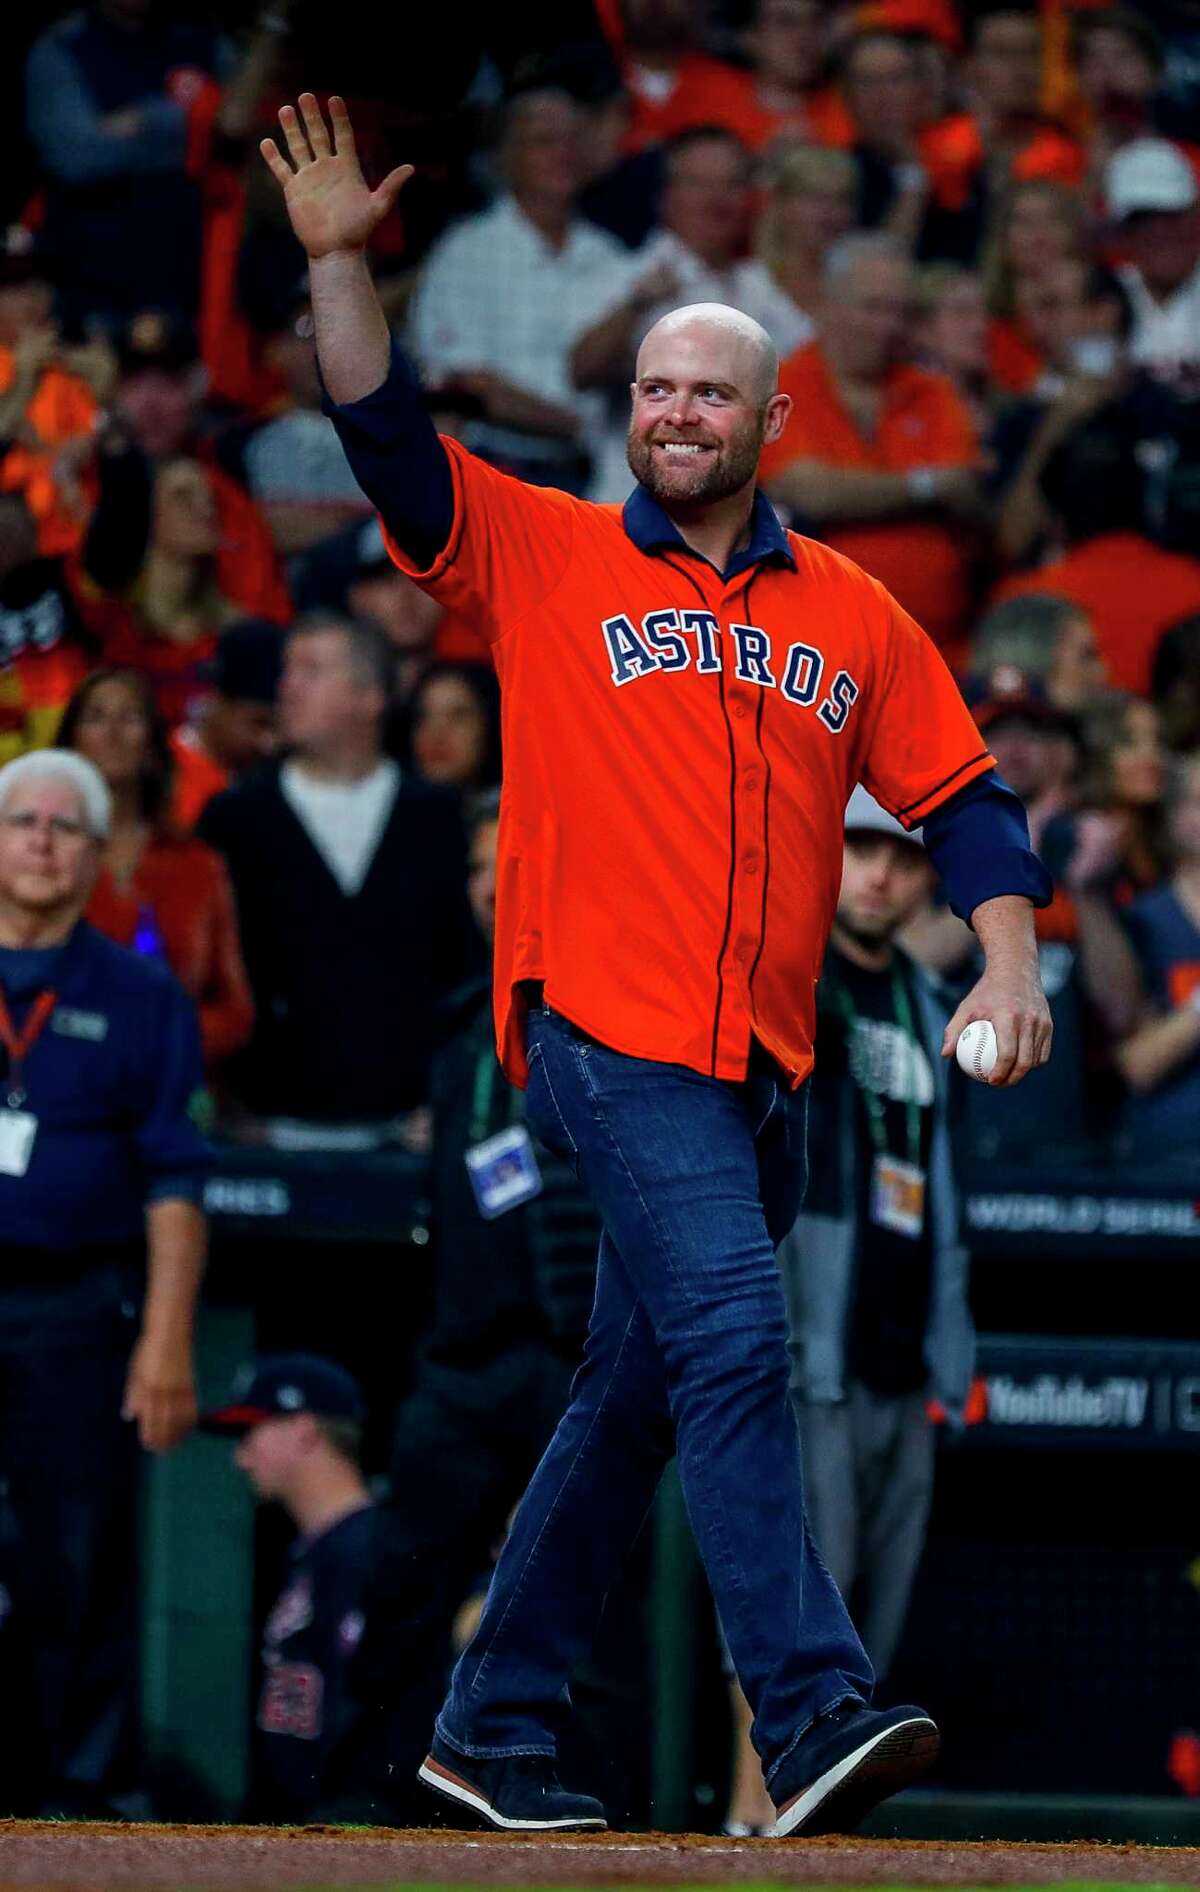 Brian McCann is recognized by the crowd before Game 1 of the World Series at Minute Maid Park in Houston on Tuesday, Oct. 22, 2019.